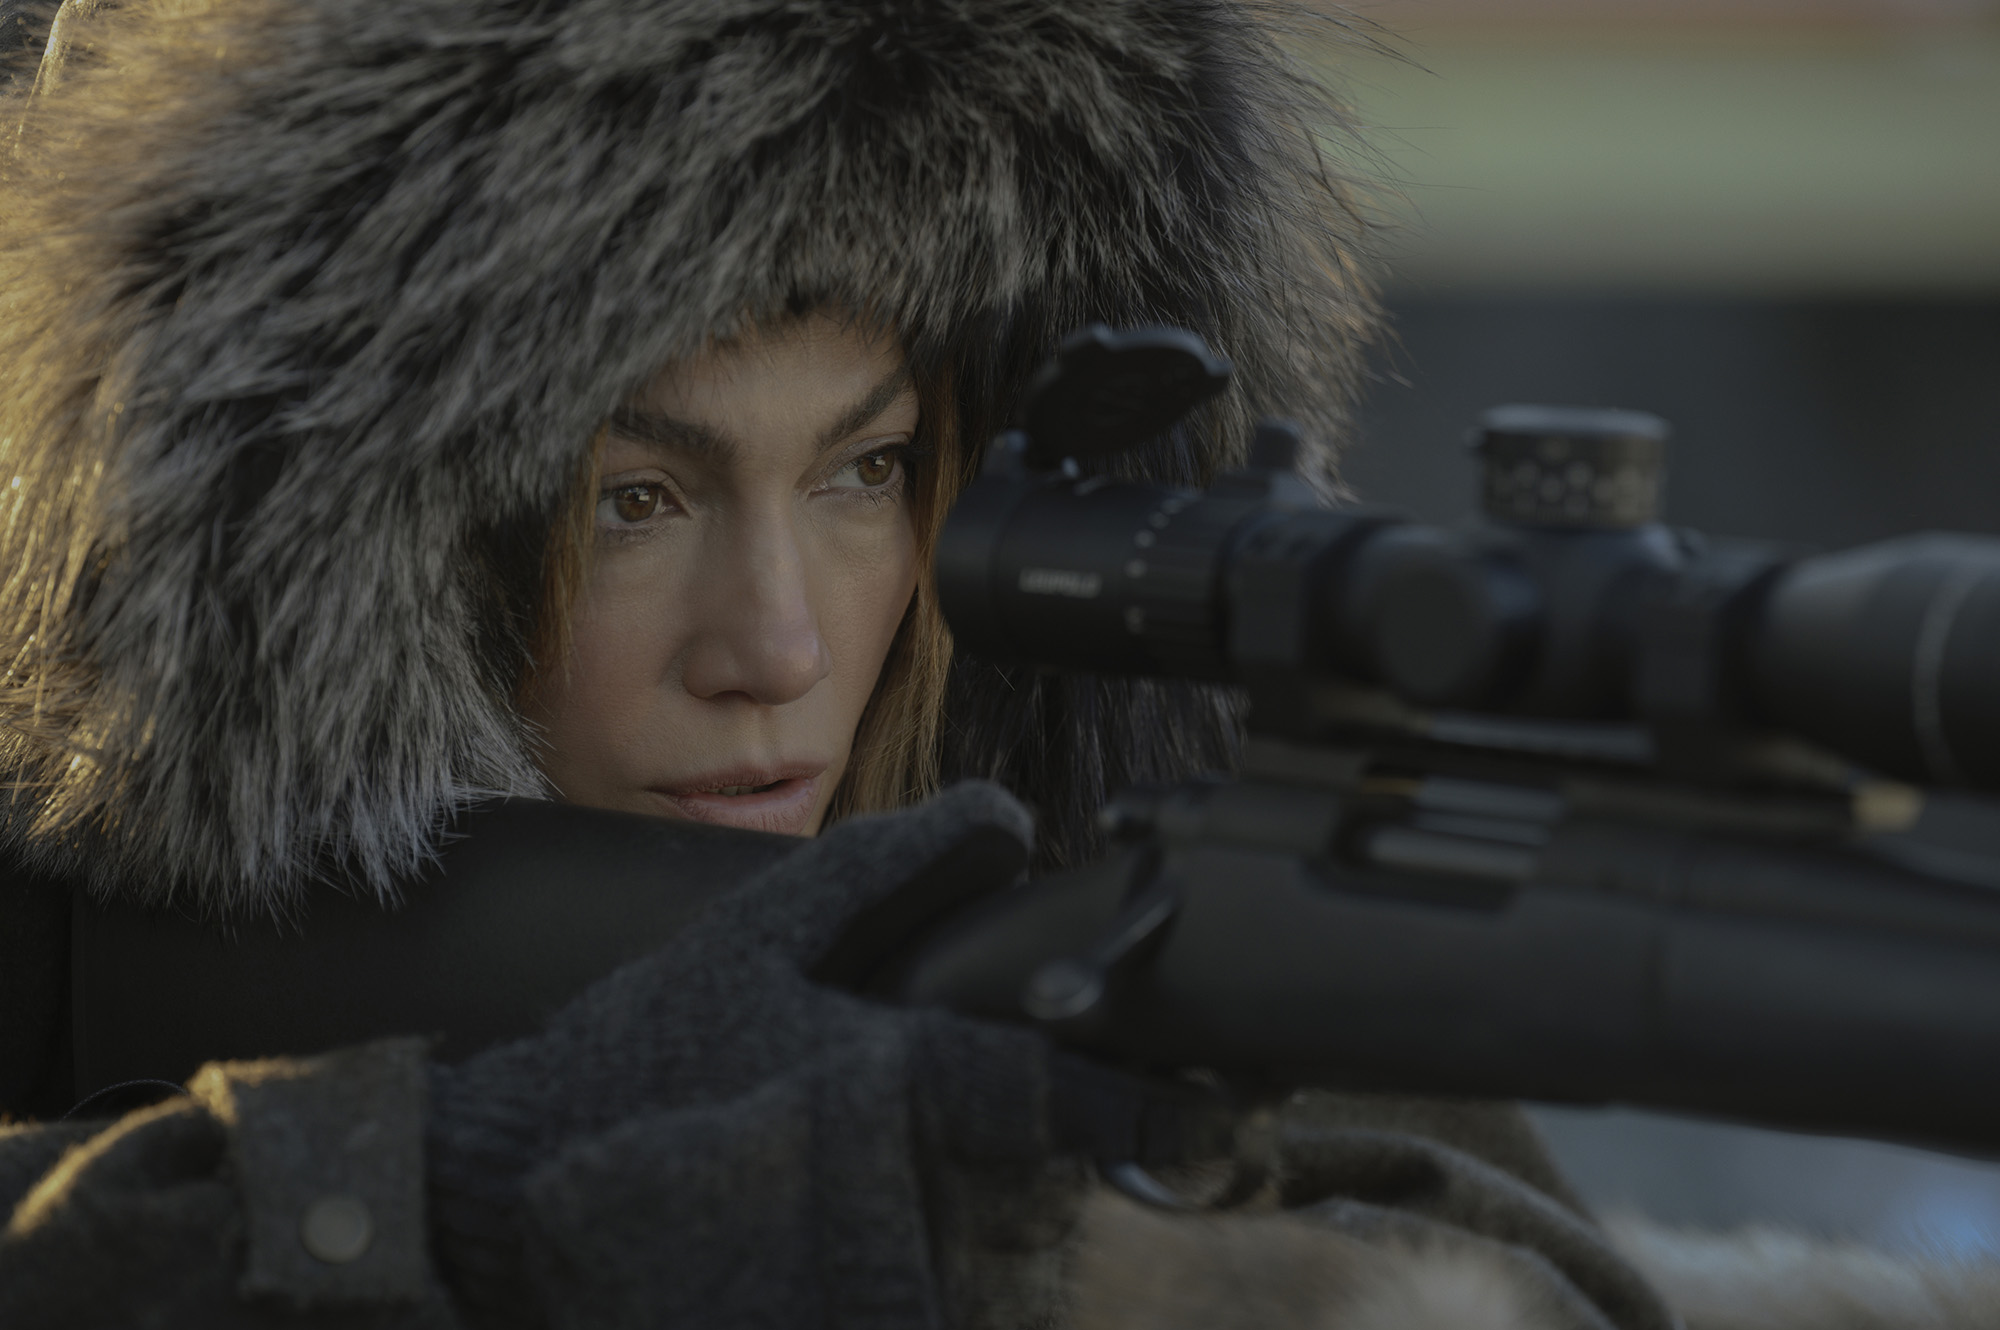 'The Mother' is an action thriller starring Jennifer Lopez